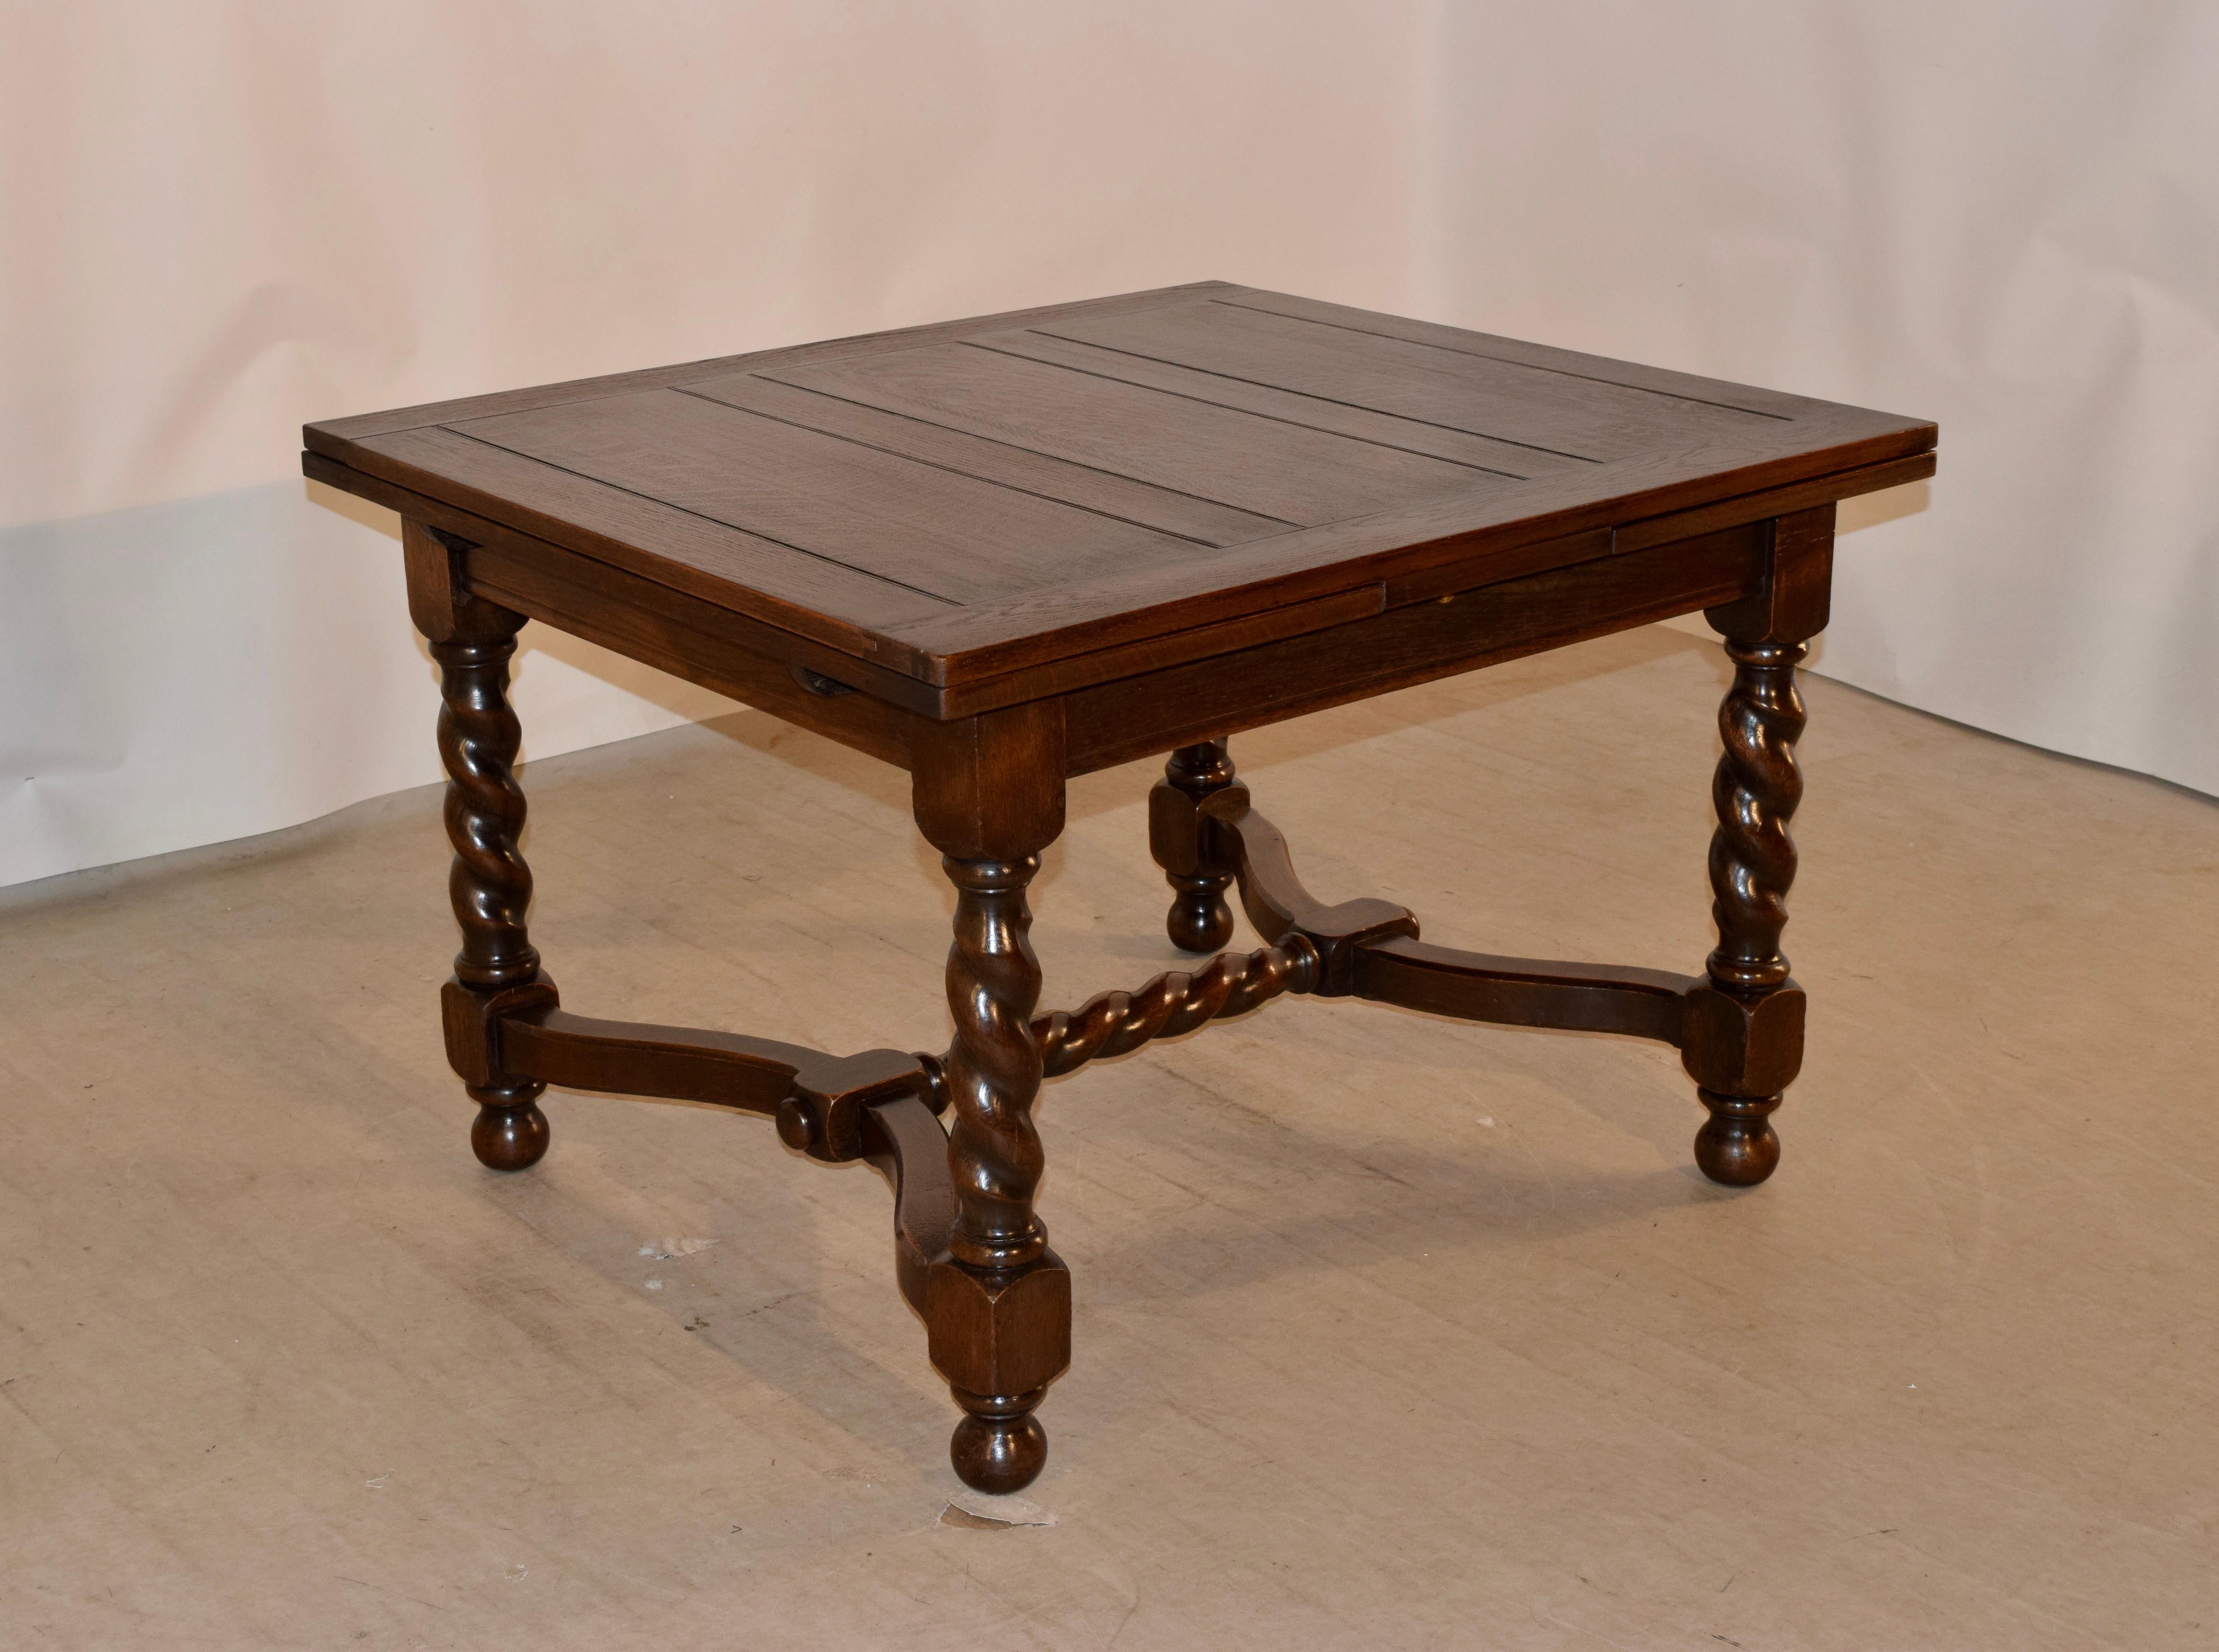 English oak draw-leaf table with a paneled top and leaves, following down to a simple apron. It is supported on hand turned barley twist legs, ending in hand turned feet and joined by serpentine stretchers and a matching hand turned barley twist